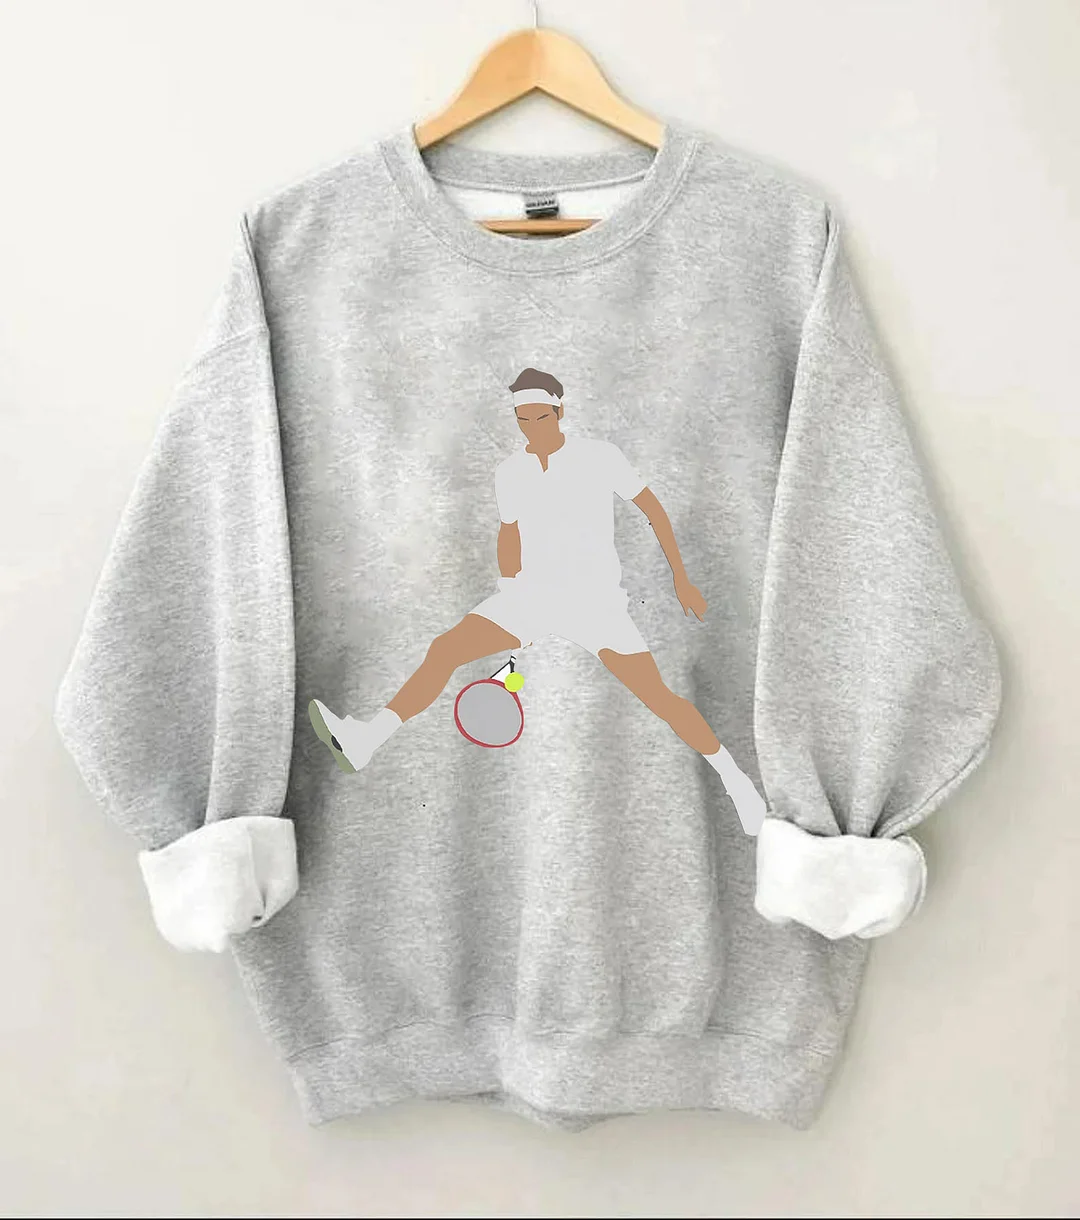 The Goat RF Tennis Legend Thanks For All The Countless Memories Sweatshirt